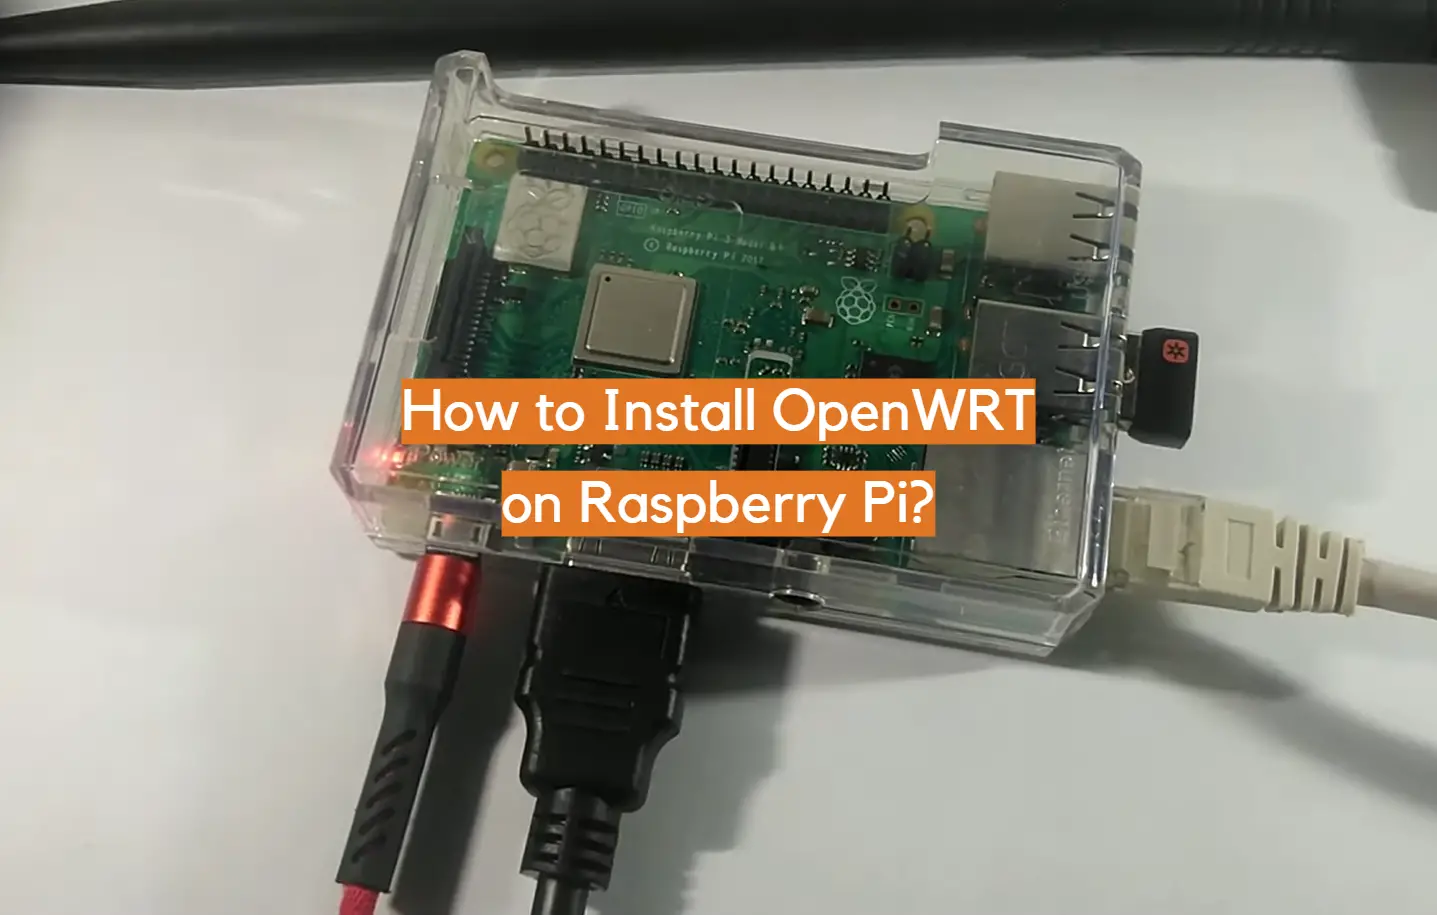 How to Install OpenWRT on Raspberry Pi?